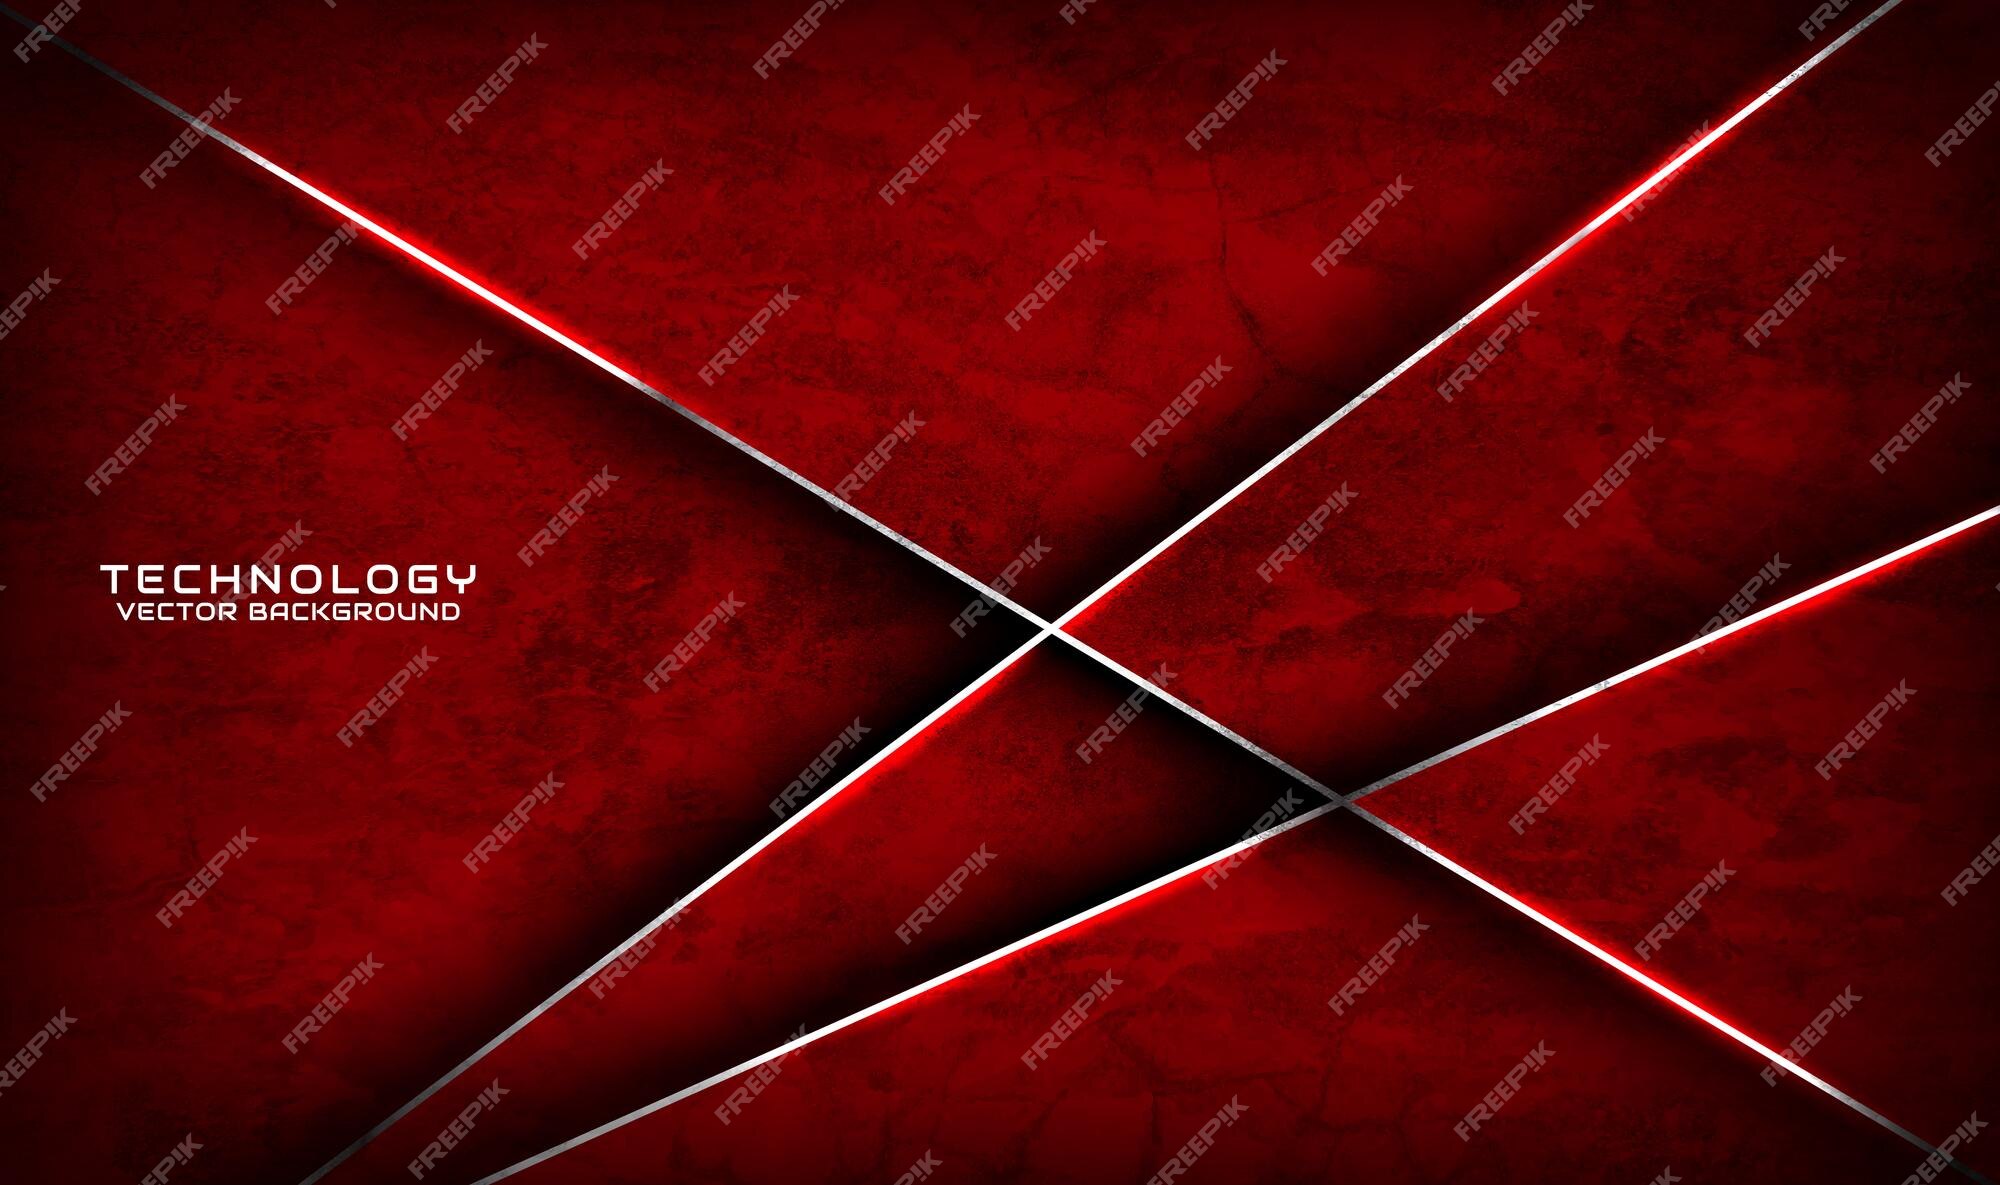 Premium Vector | 3d red rough grunge techno abstract background overlap  layer on dark with silver lines decoration